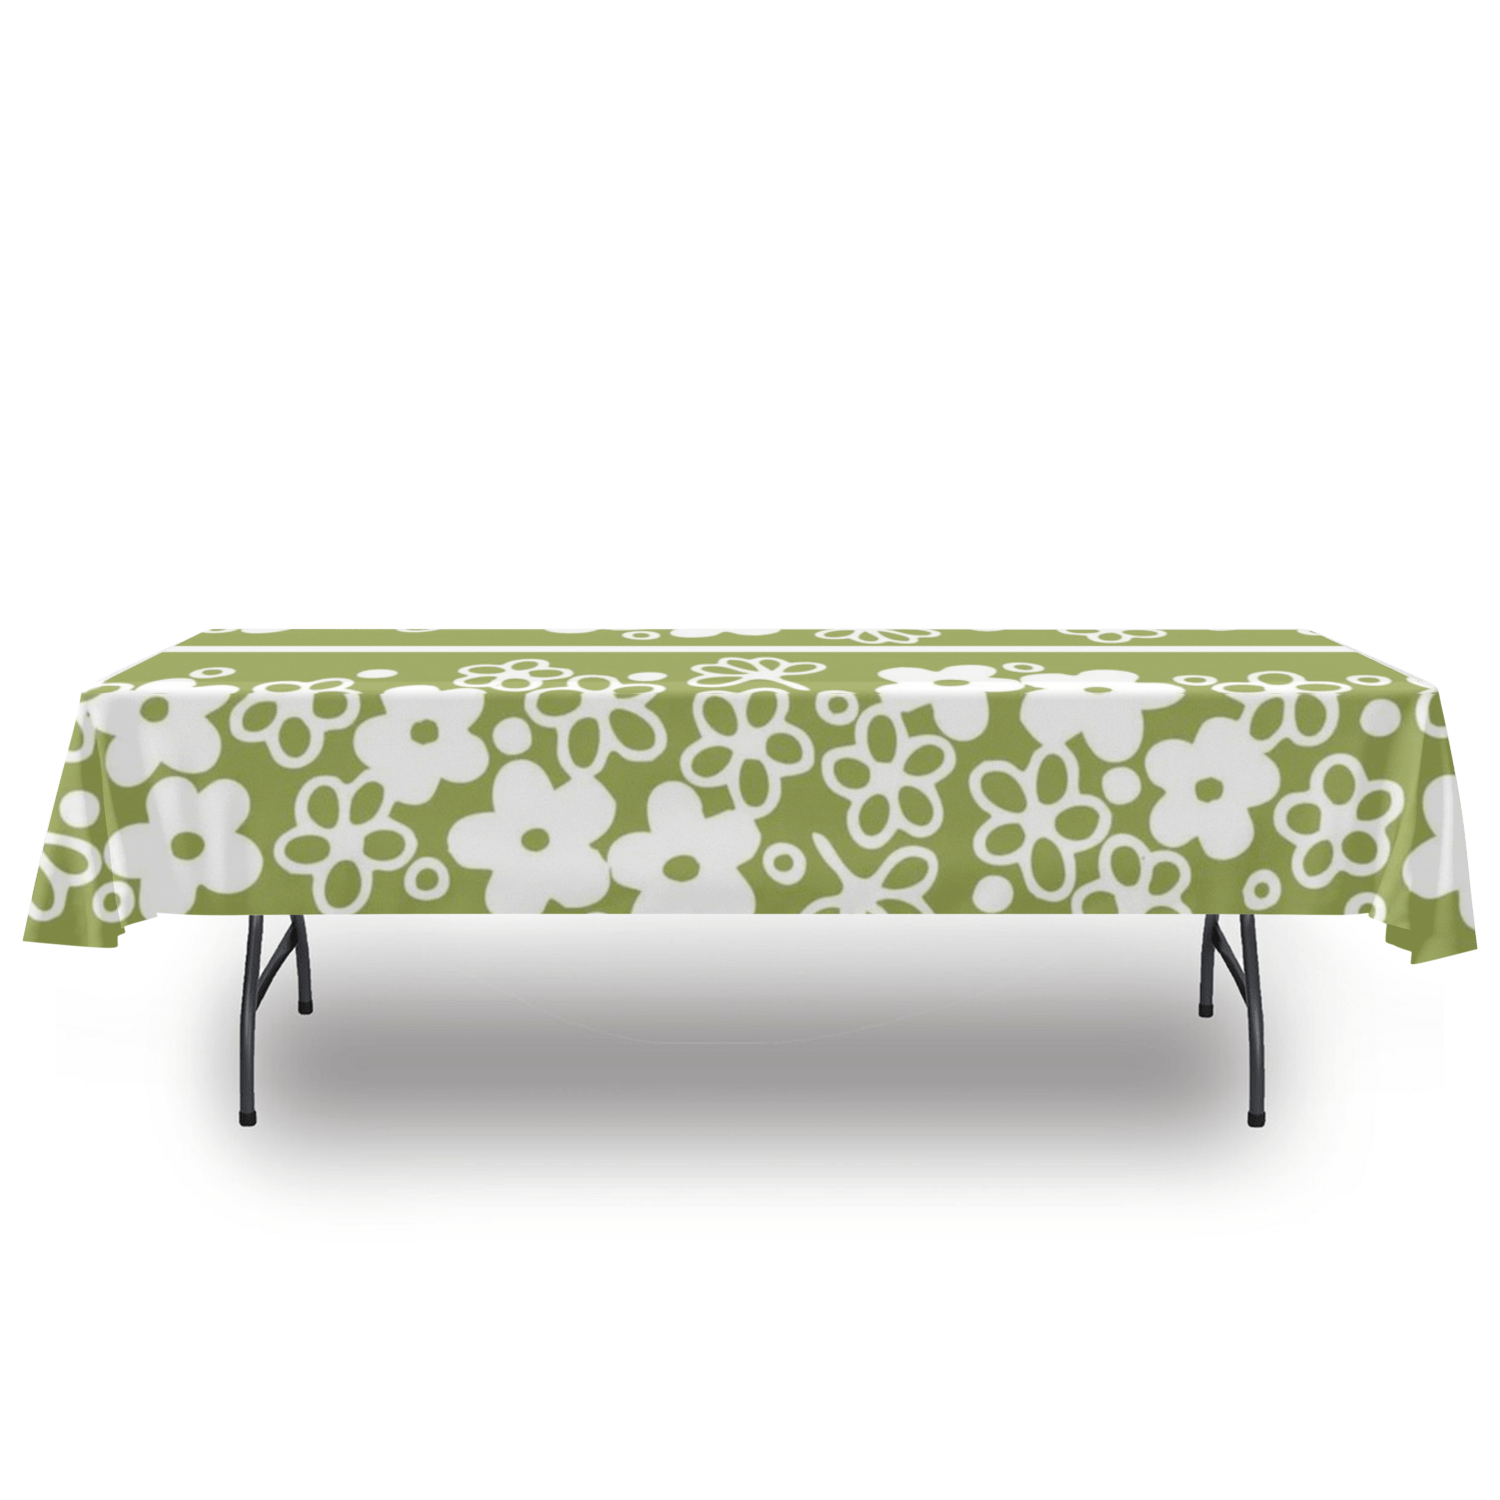 Retro Green, Spring Blossom, Pyrex Lover, Mod Daisy MCM Tablecloth tablecloth 54&quot; x 120&quot;